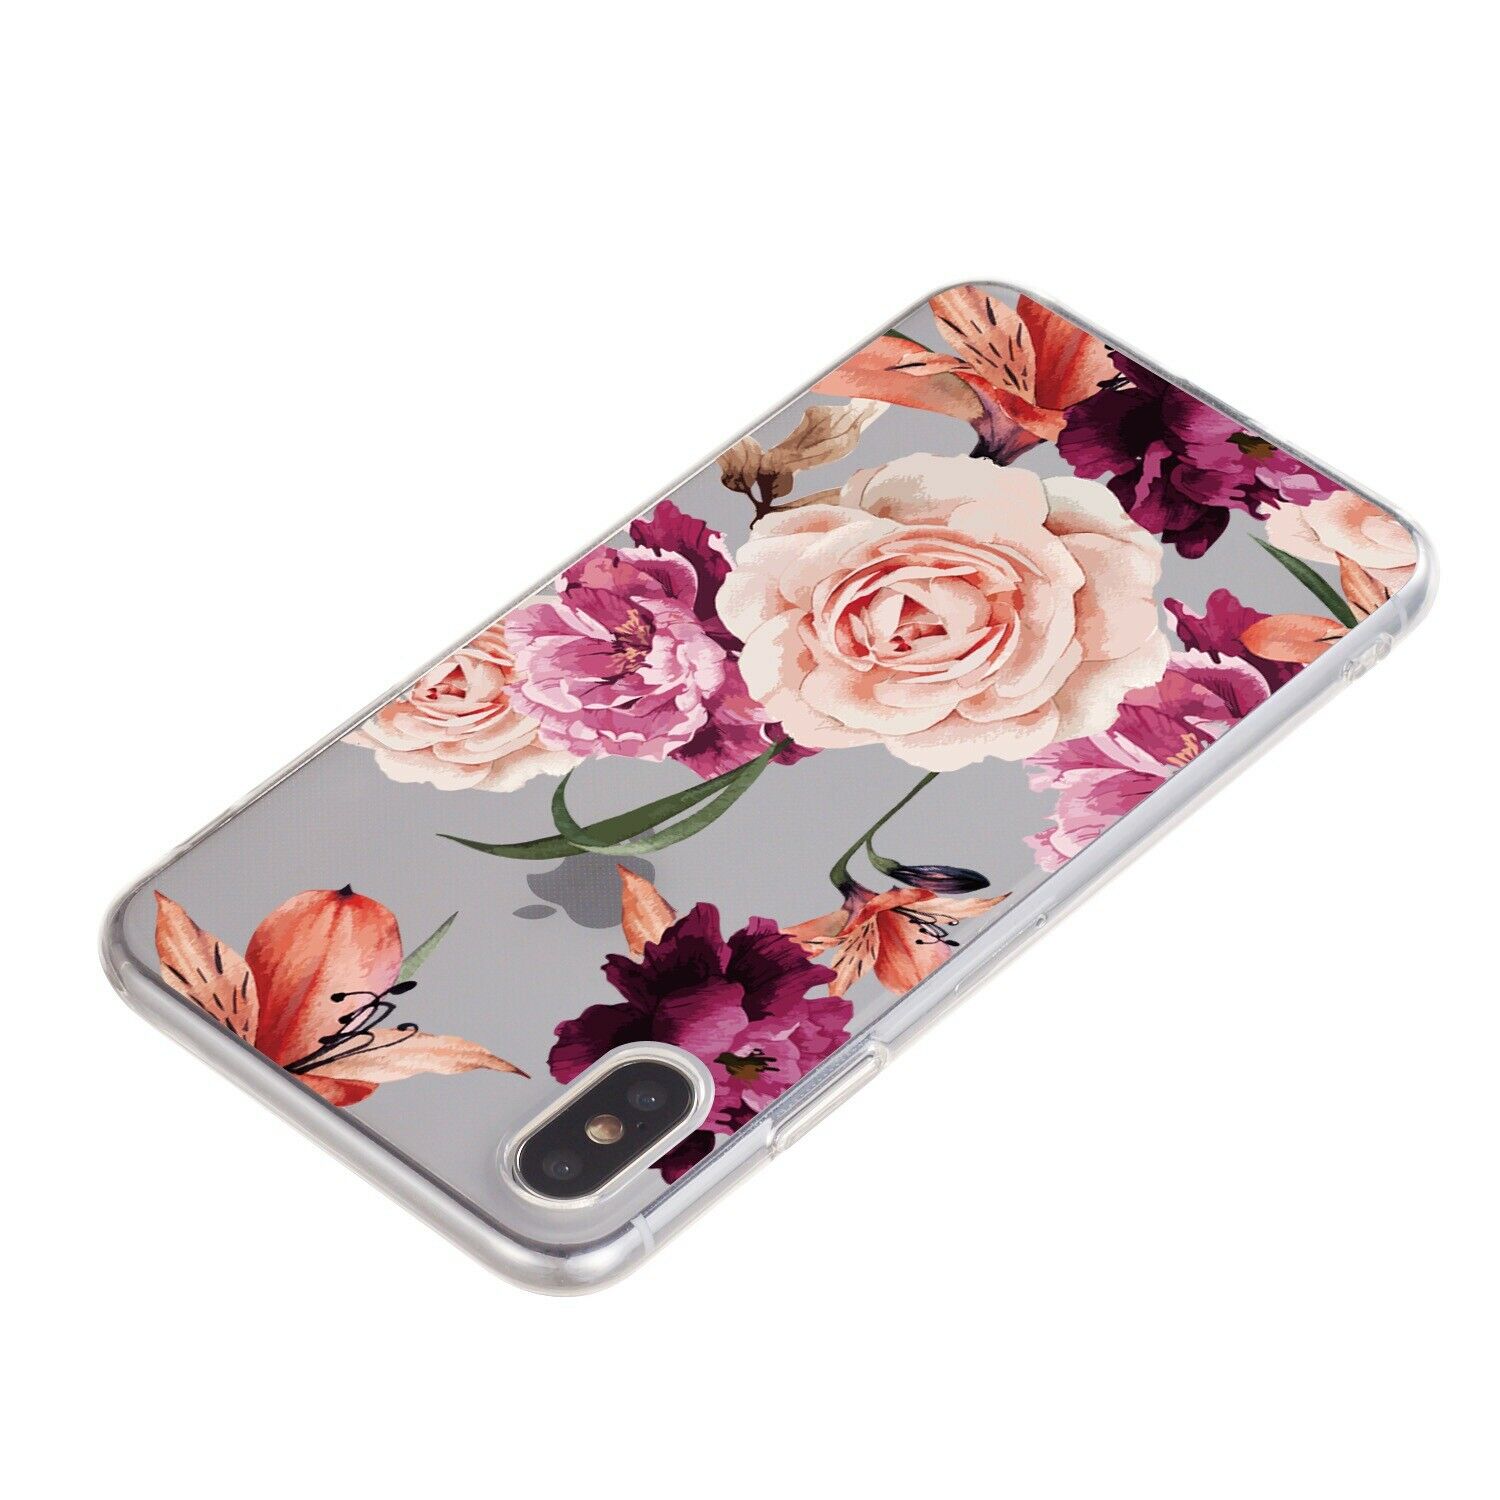 Flower Pattern Clear Soft Ultra Slim Back Case For iPhone